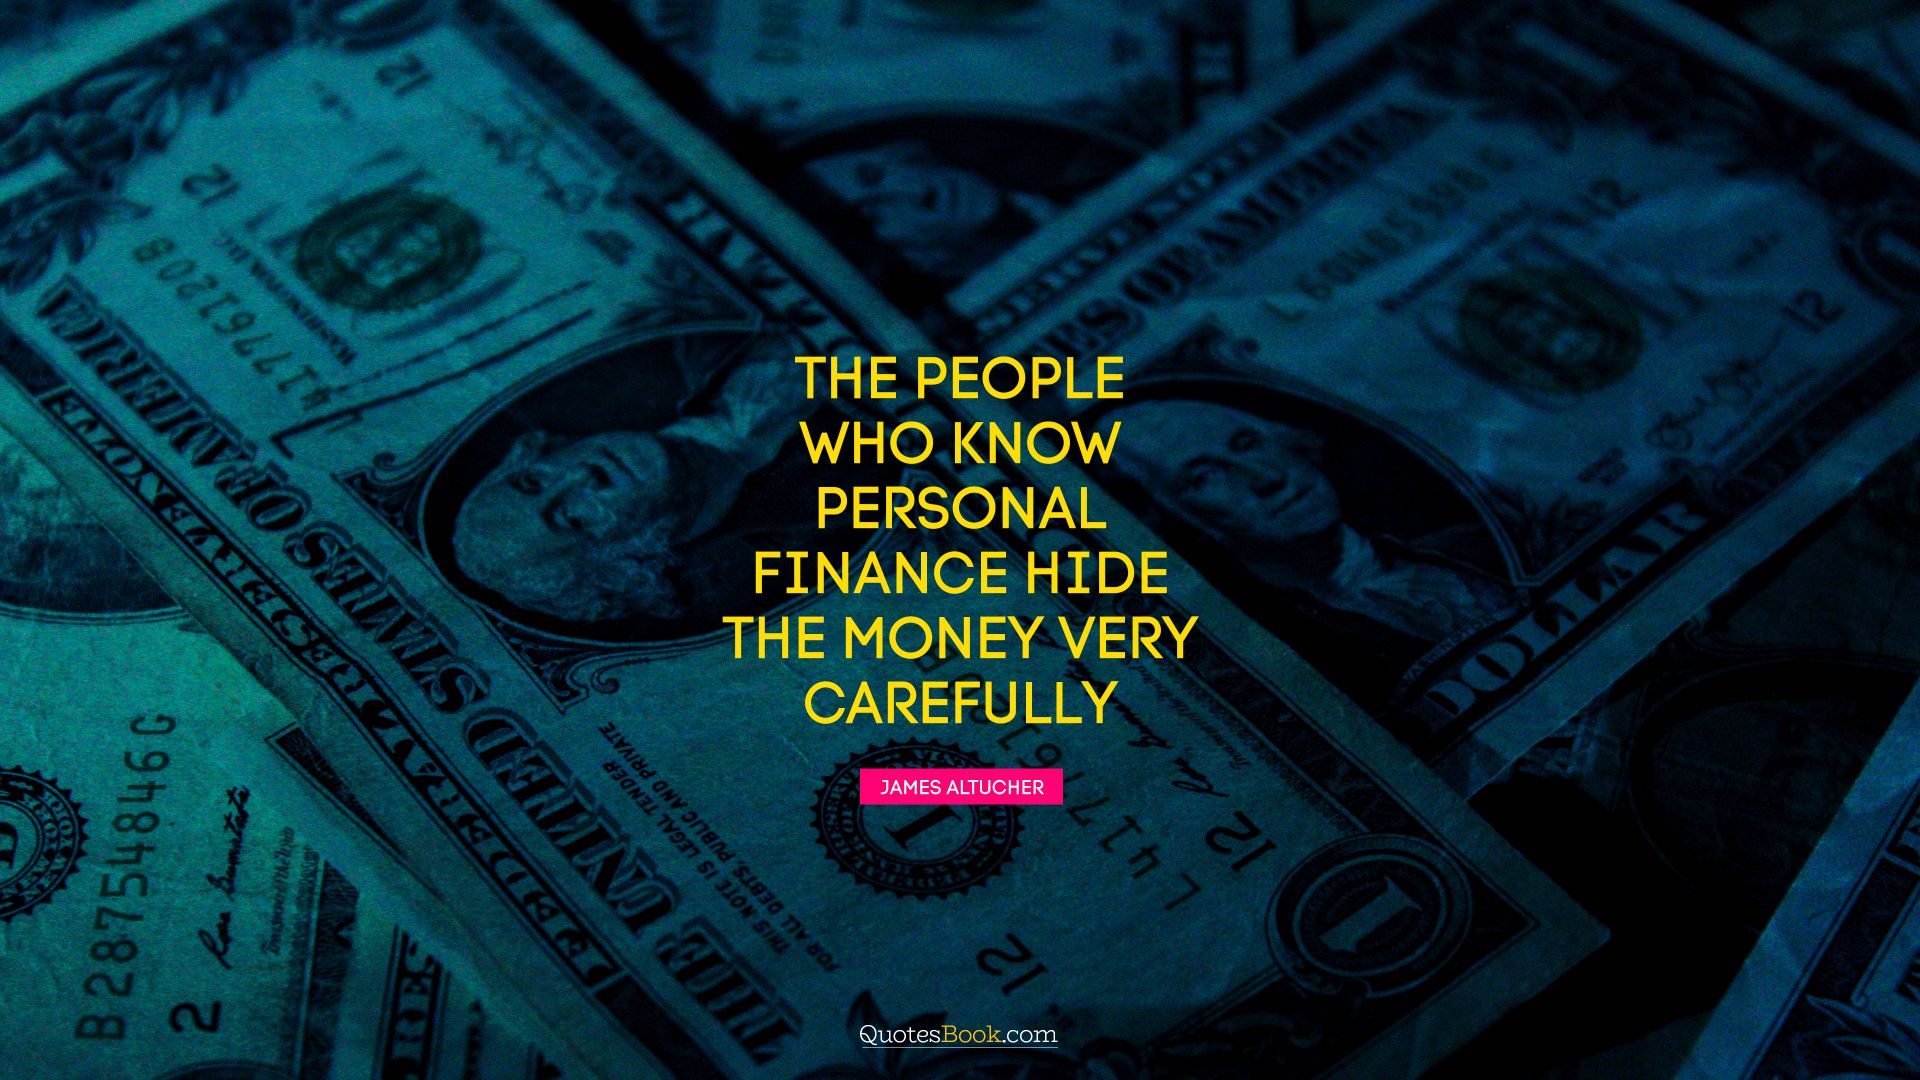 The people who know personal finance hide the money very carefully. - Quote by James Altucher